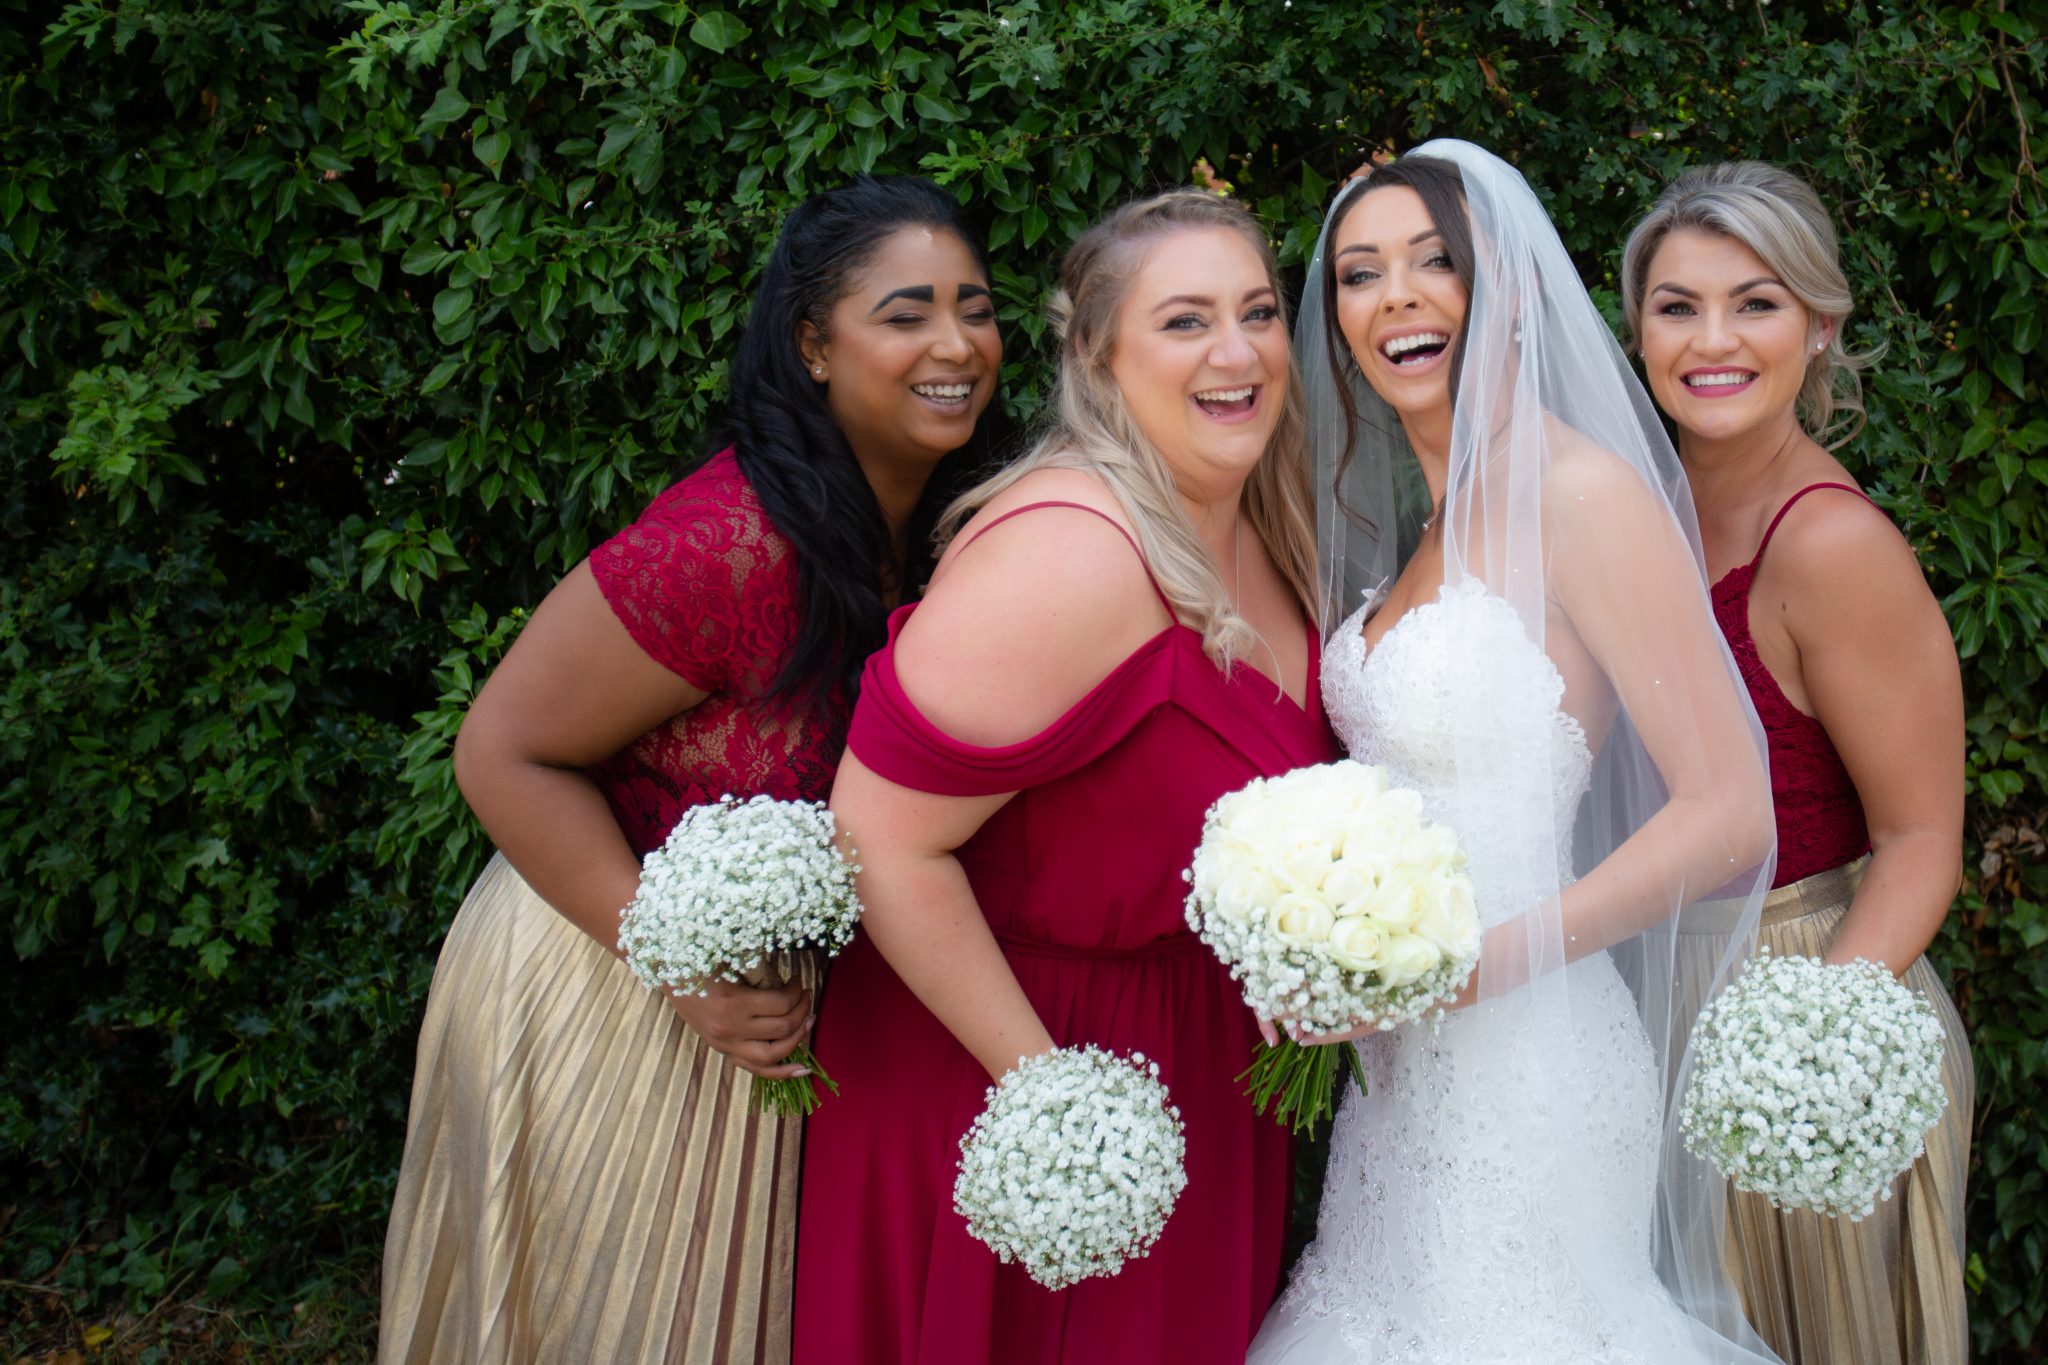 Bride and Bridesmaids laughing.